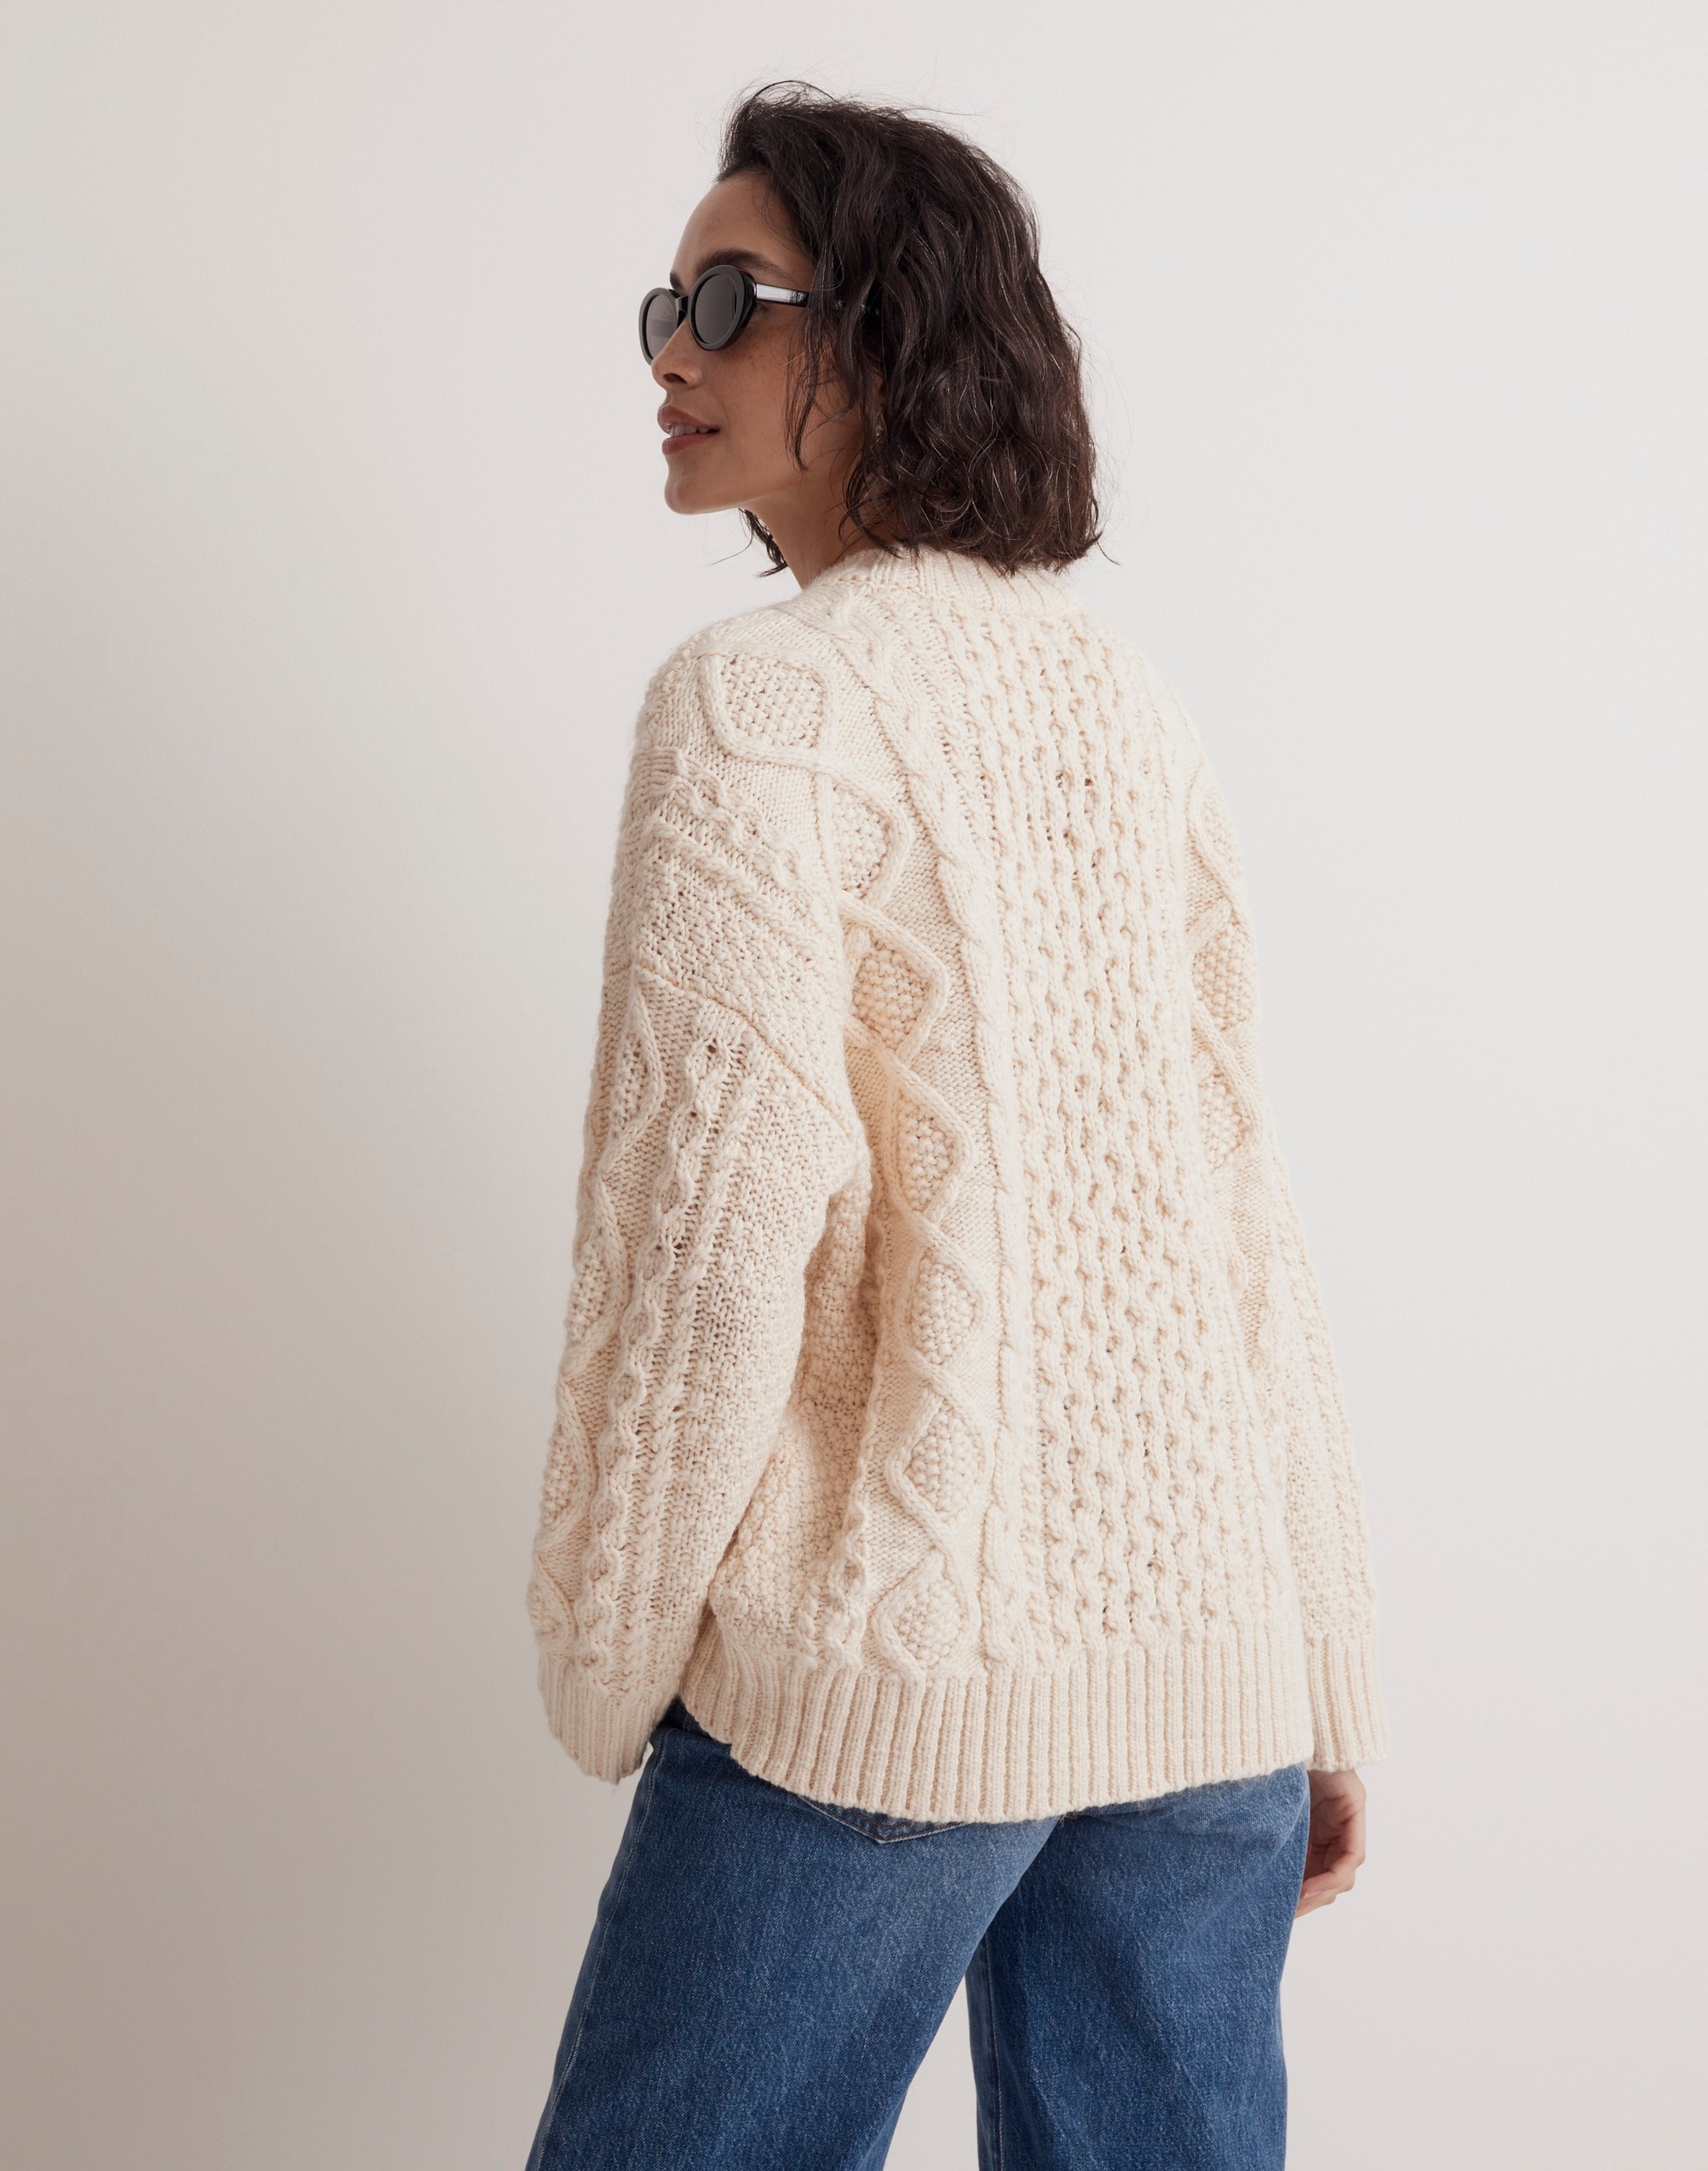 Wool sweater Oversized sweater Cable knit sweater Hand knitted